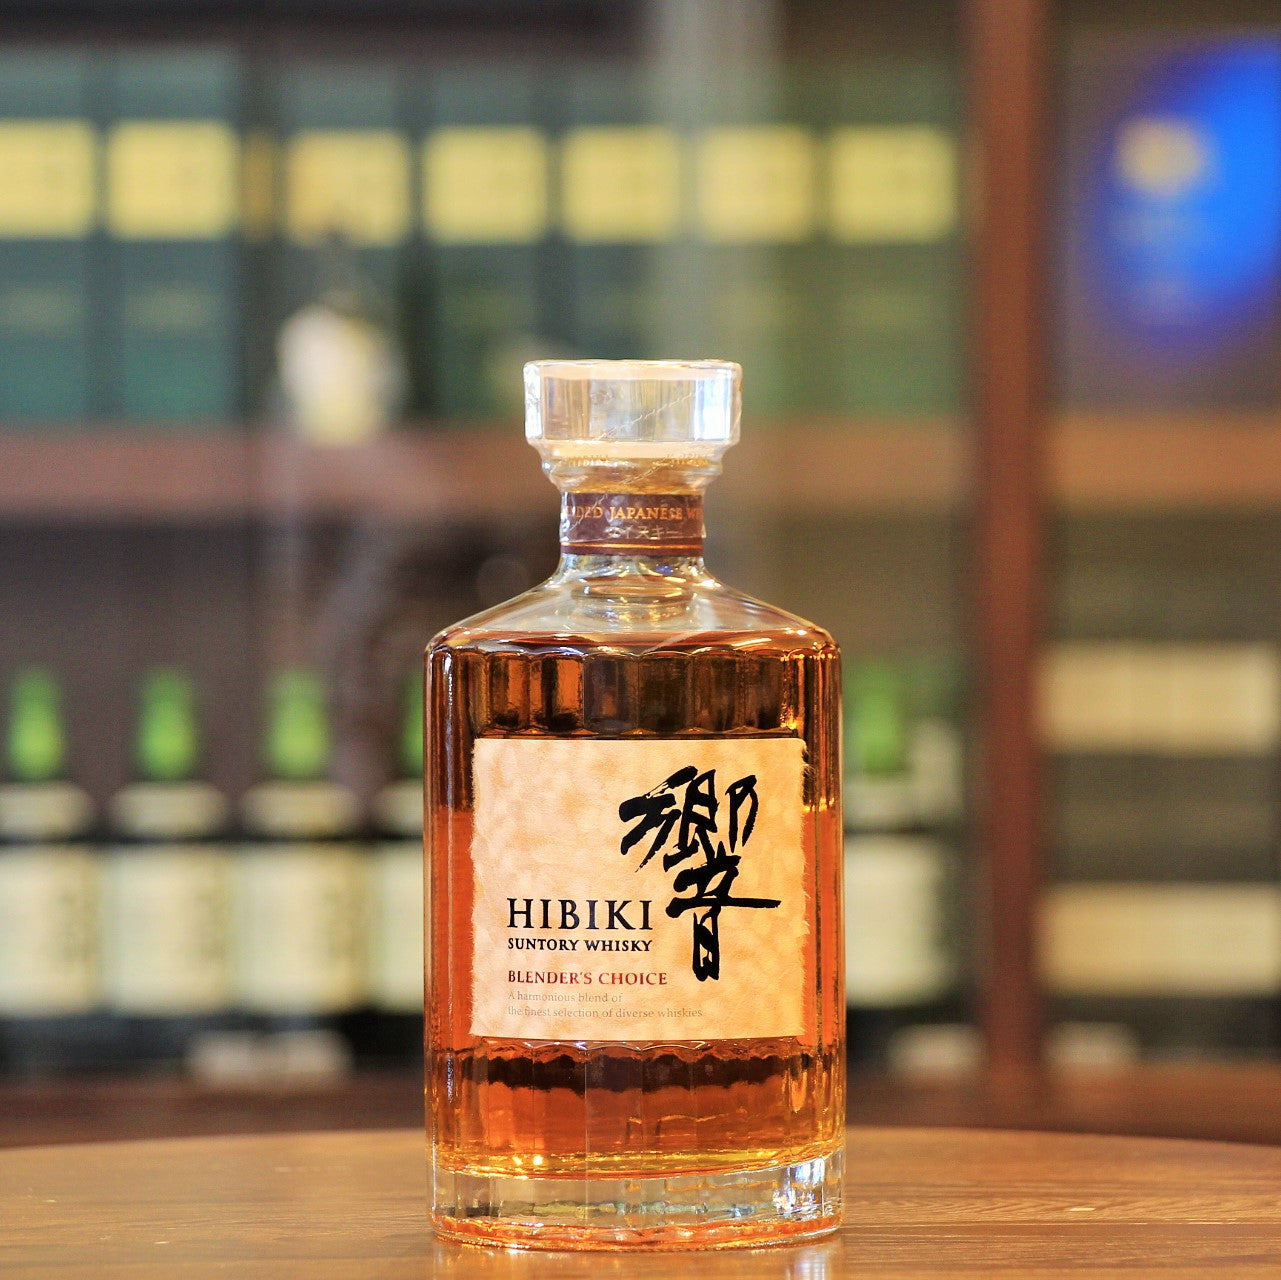 Released around September 2018, soon after the Hibiki 17 was discontinued, this is rumoured to/believed to be the 'replacement". A harmonious blend of Japanese malt and grain whiskies from Yamazaki, Hakushu and Chita presented in the traditional Hibiki 24 faceted bottle and aged between 12 and 30 years with an average age of around 15 years. No Box is Available.